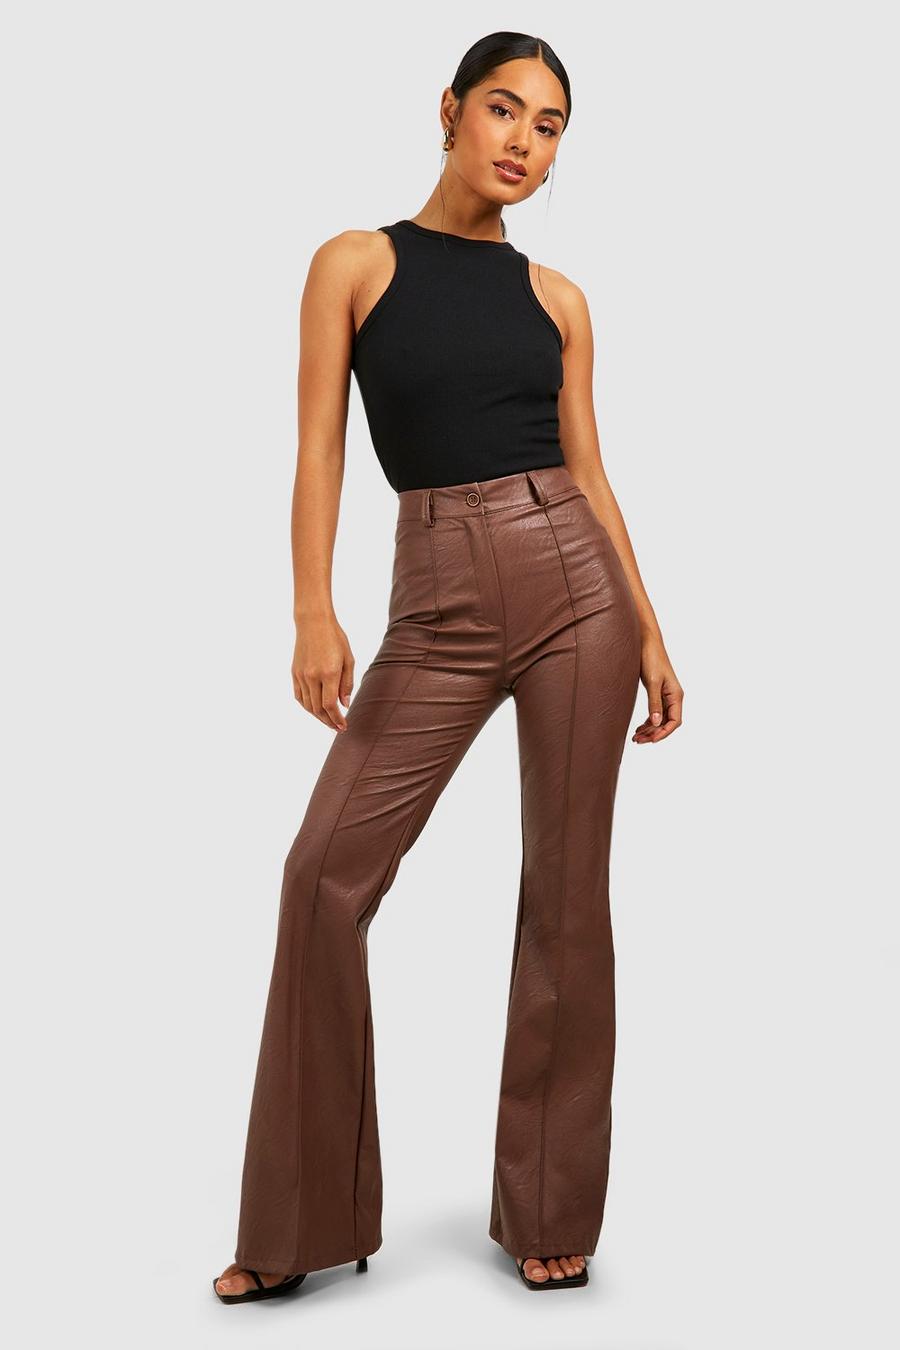 Chocolate Leather Look High Waisted Seam Front Flared Pants image number 1